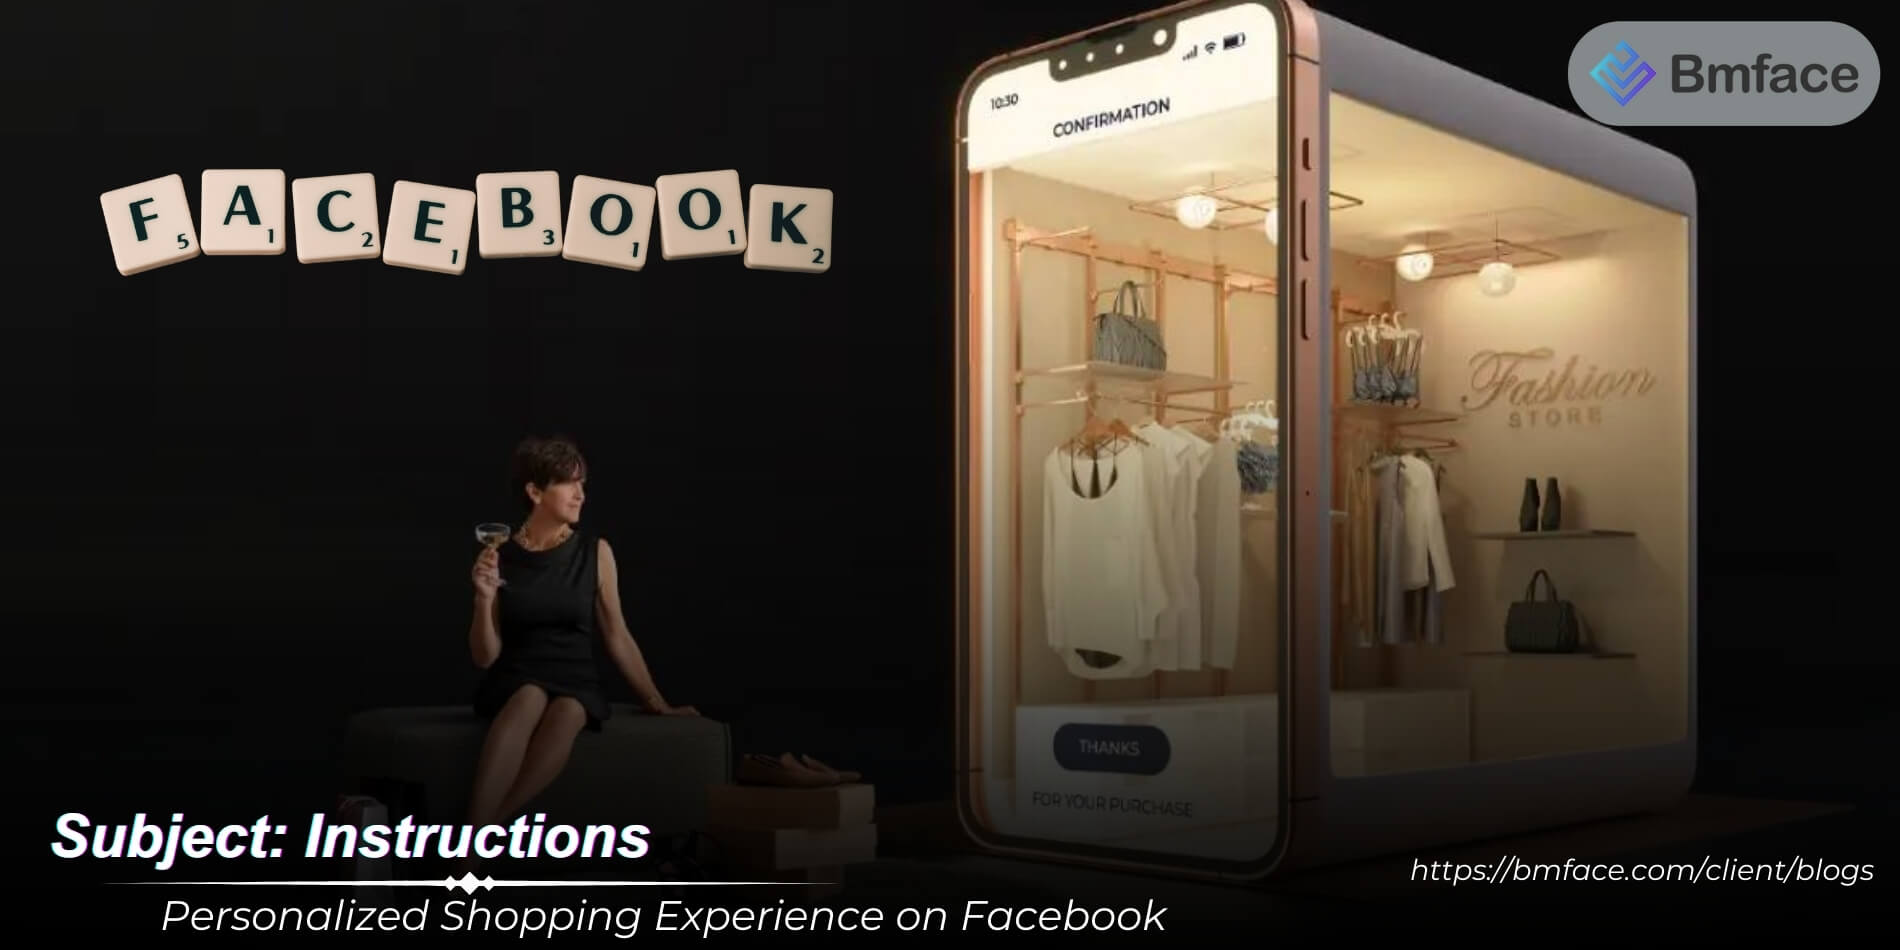 Personalized Shopping Experience on Facebook